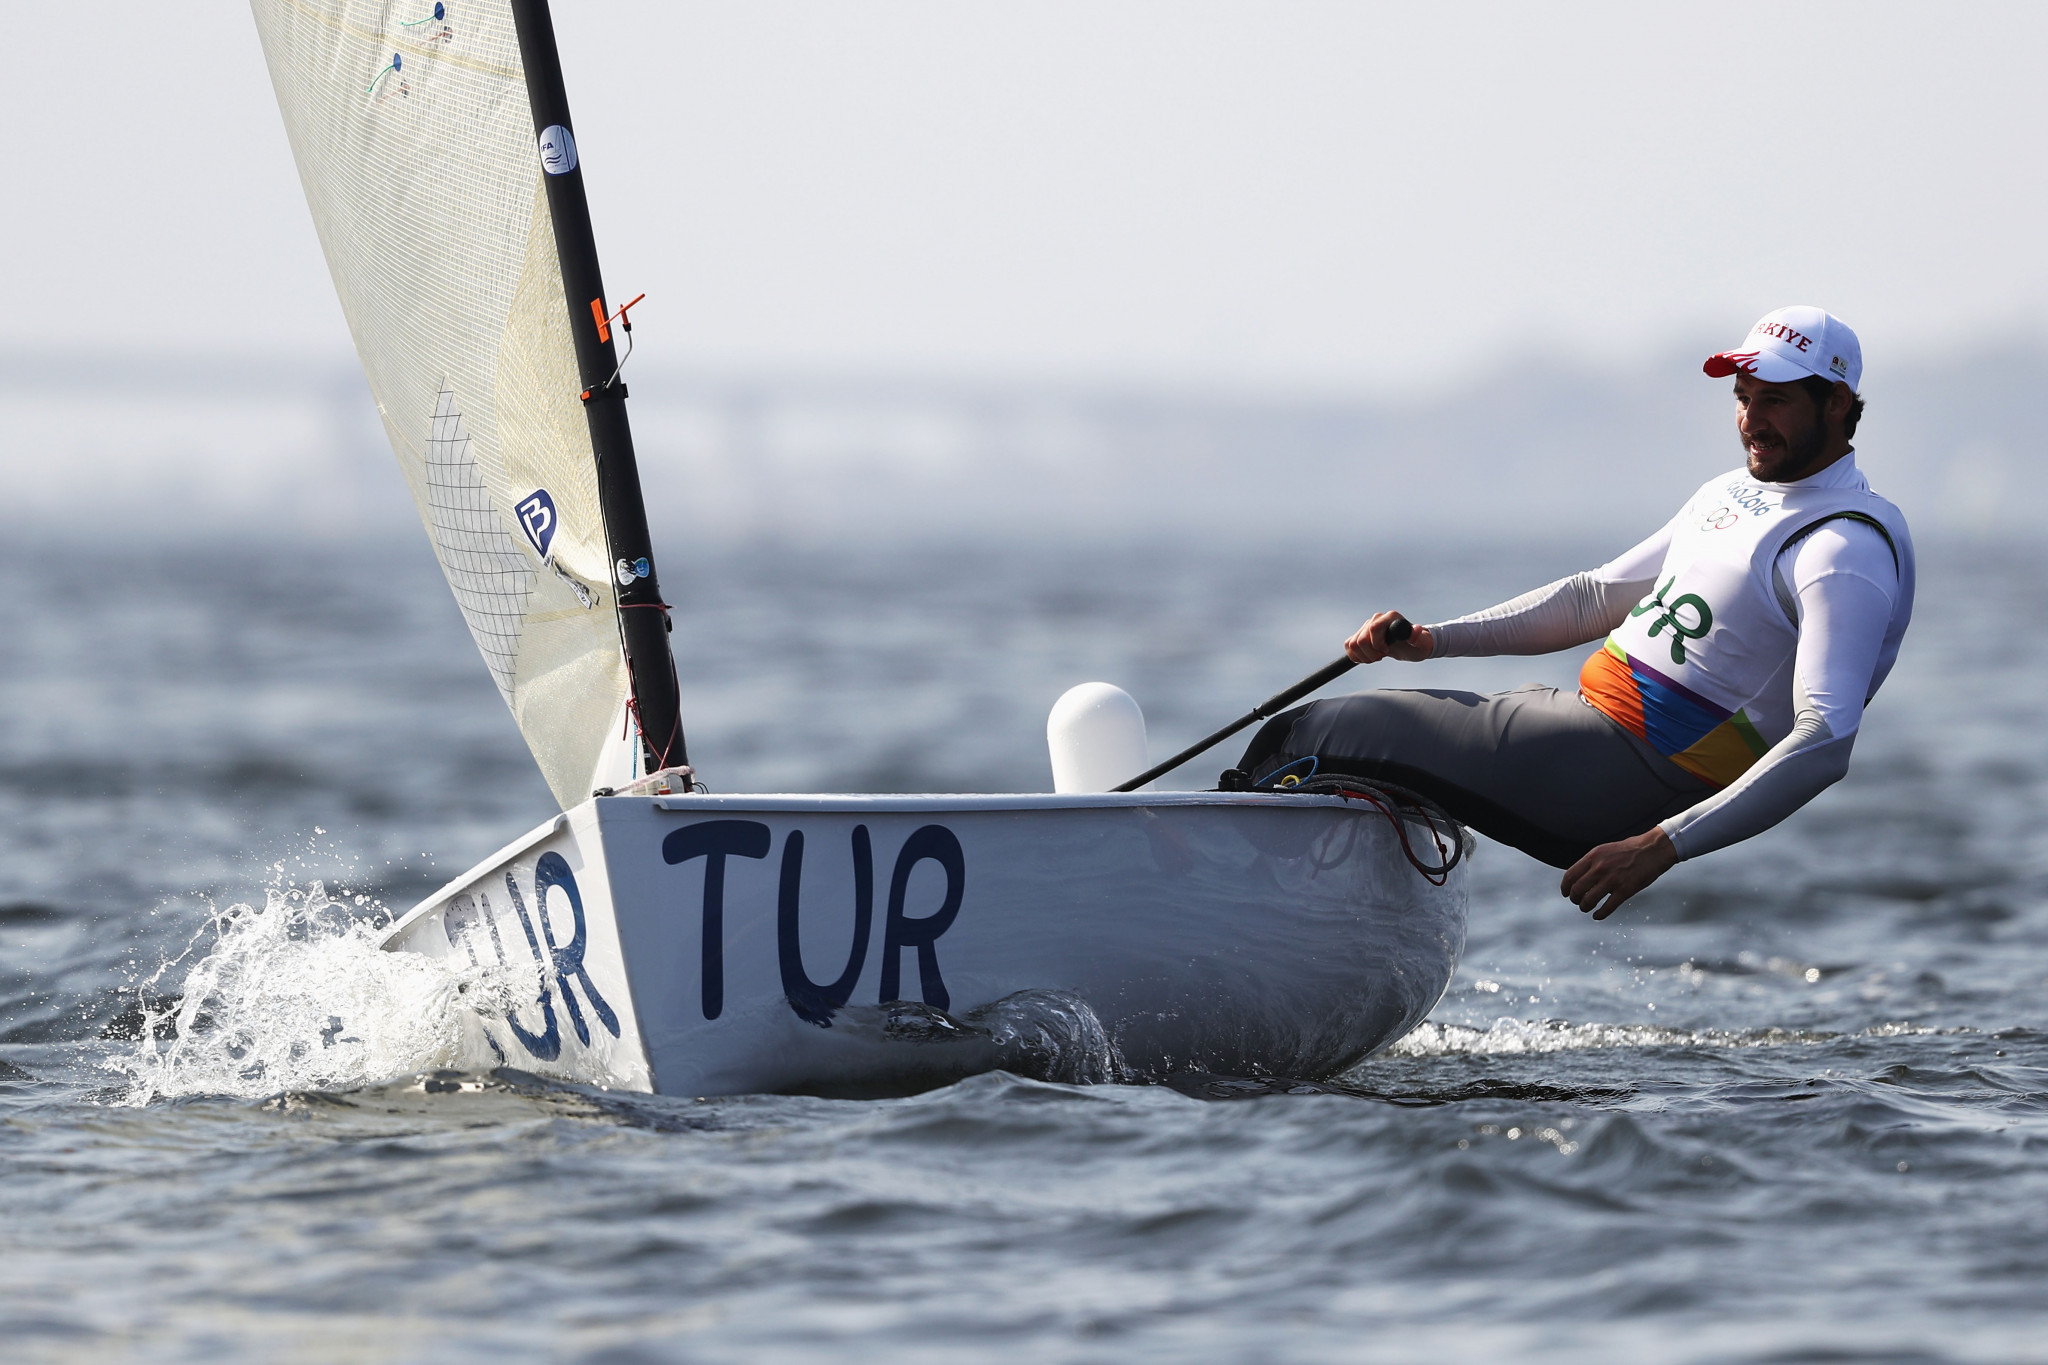 Alican Kaynar bagged two race victories on day three of the Finn European Championships ©Getty Images